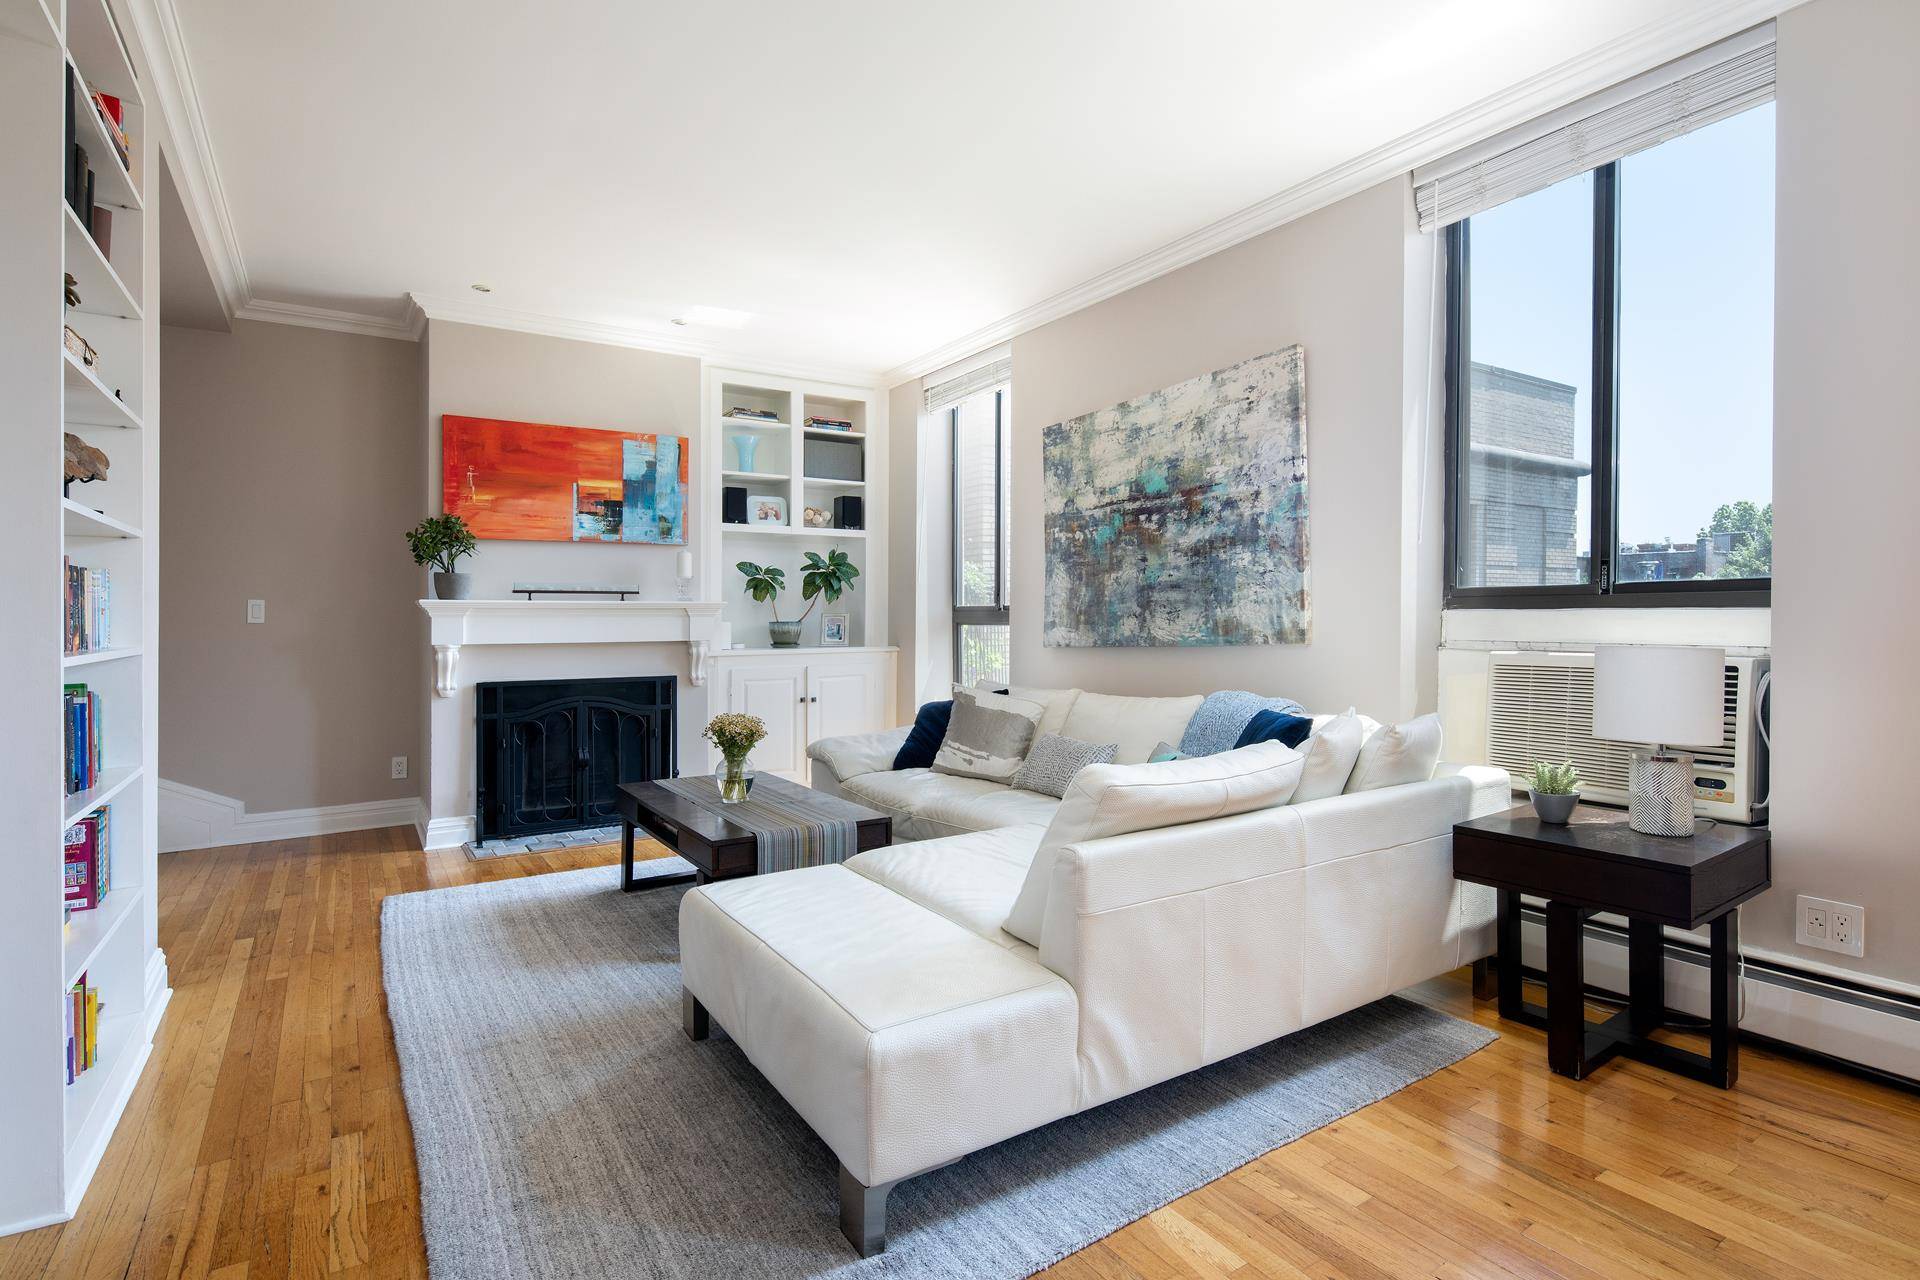 Make your summer outdoor space dreams a reality in this stunning two bedroom, one bathroom co op with exclusive roof rights in prime Park Slope.